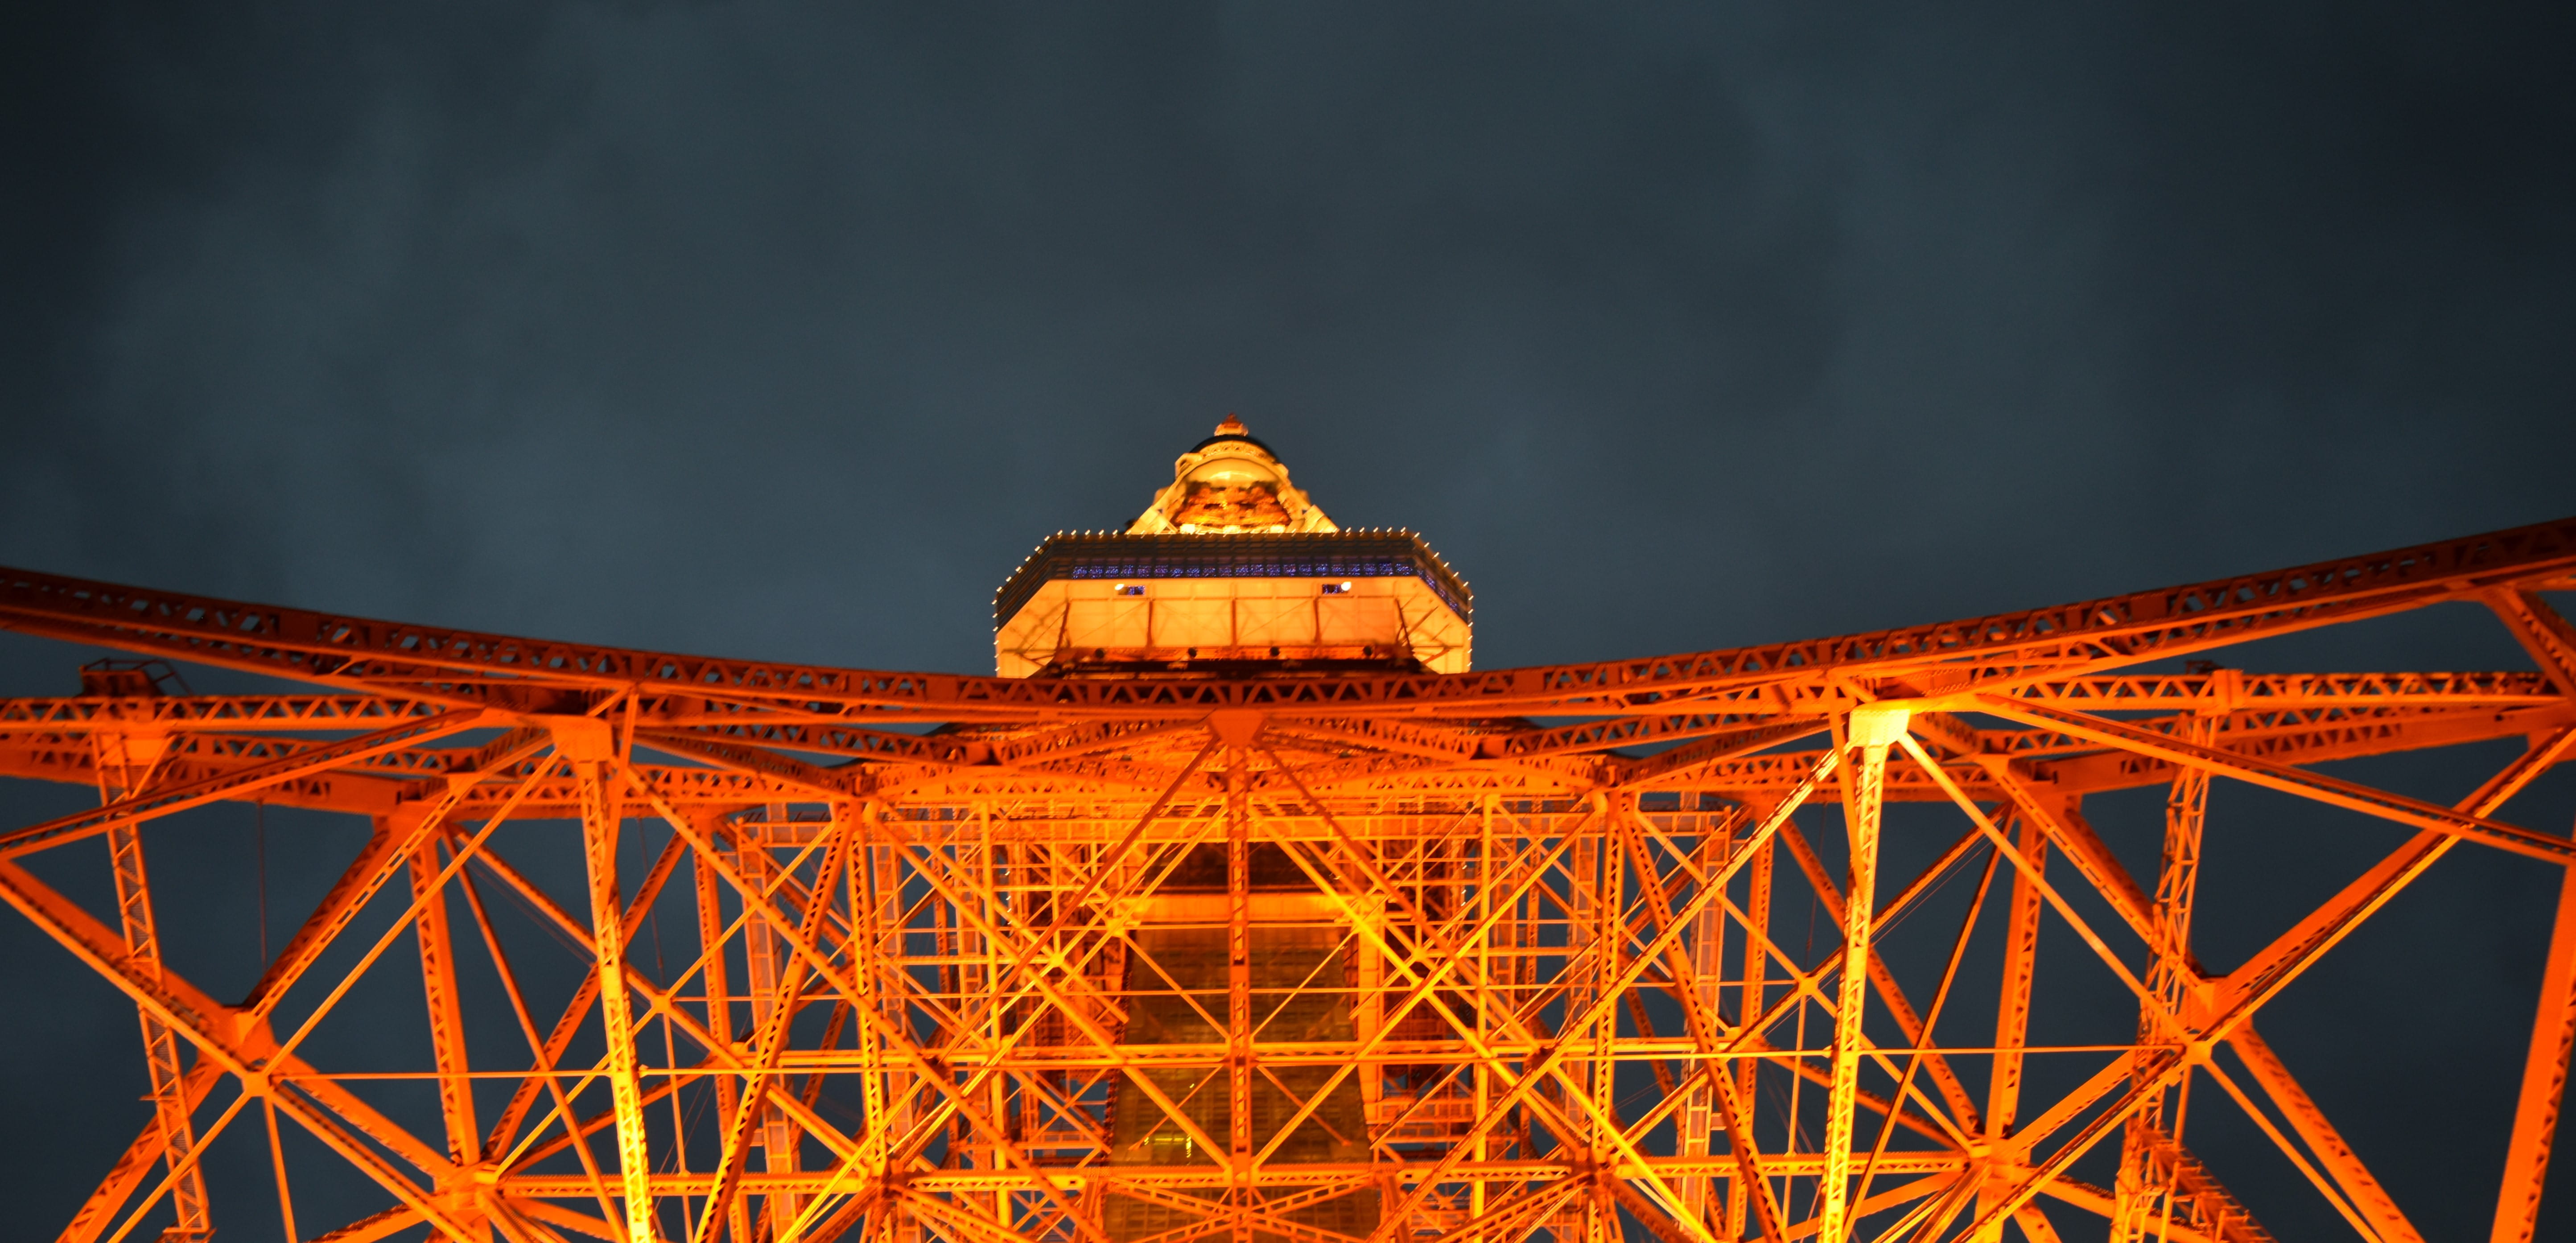 high-angle photography of Eiffel Tower during night time, orange electricity tower